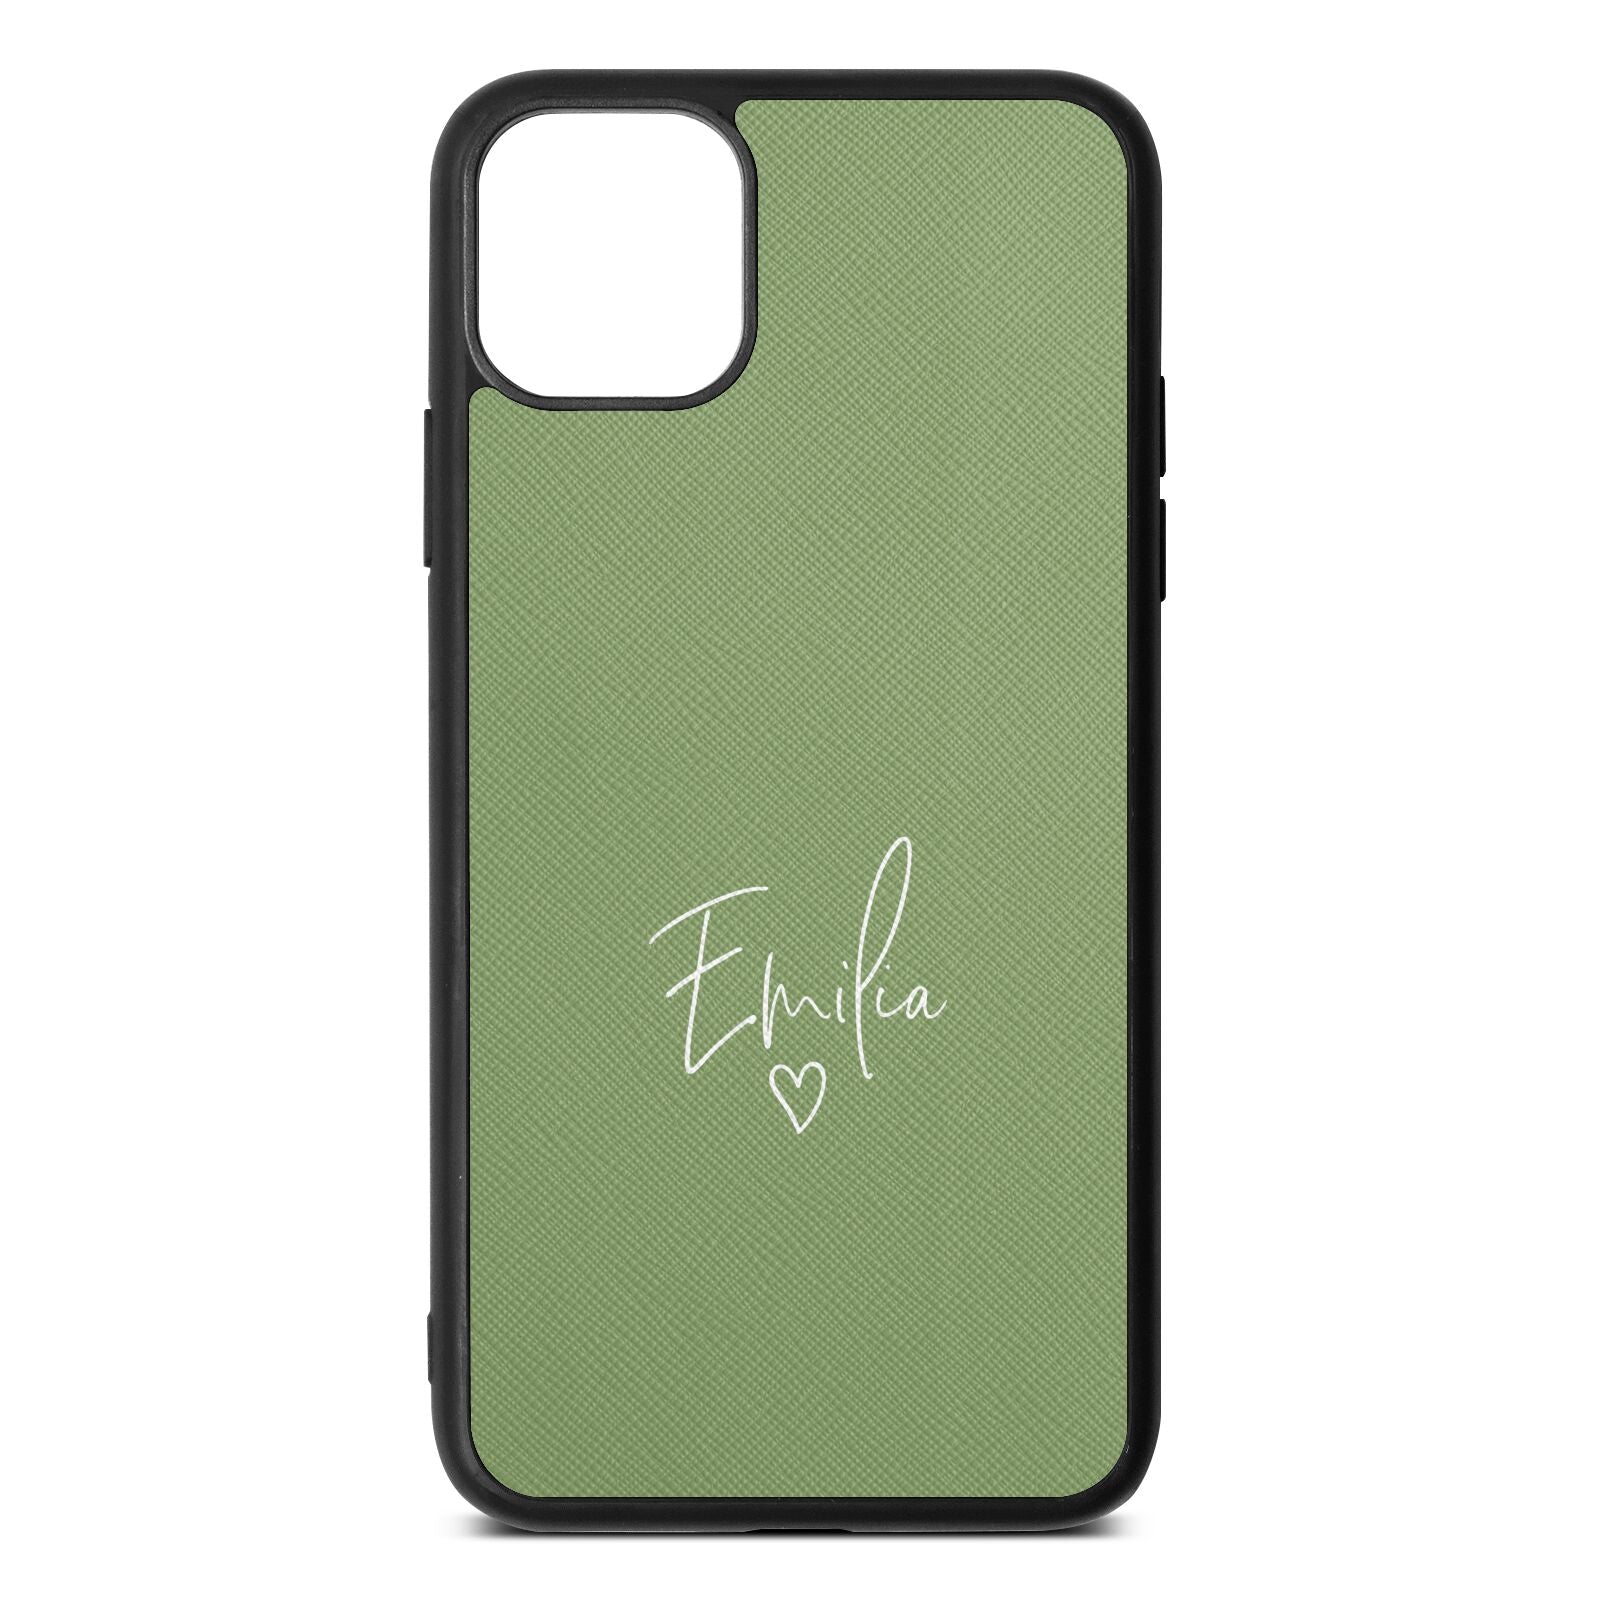 White Handwritten Name Transparent Lime Saffiano Leather iPhone 11 Pro Max Case